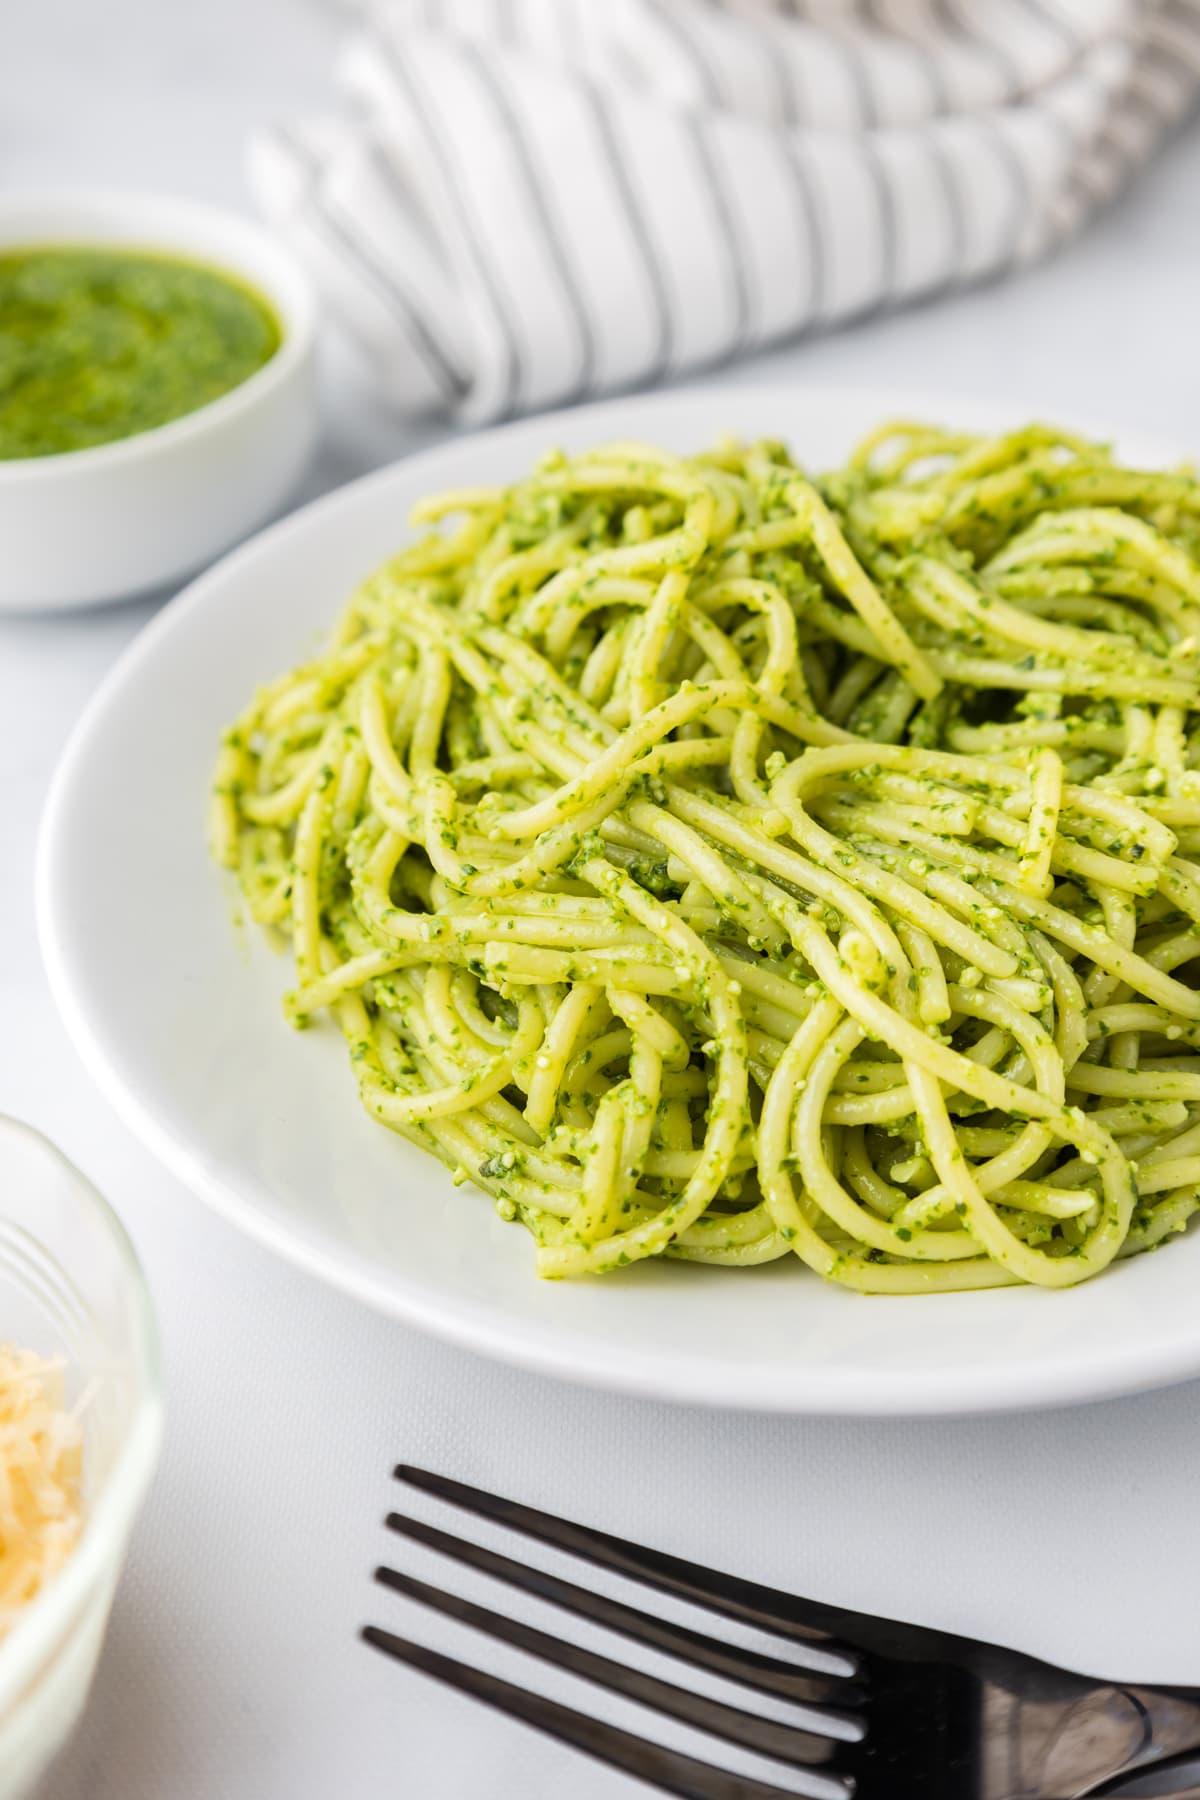 A plate of pasta with pesto sauce